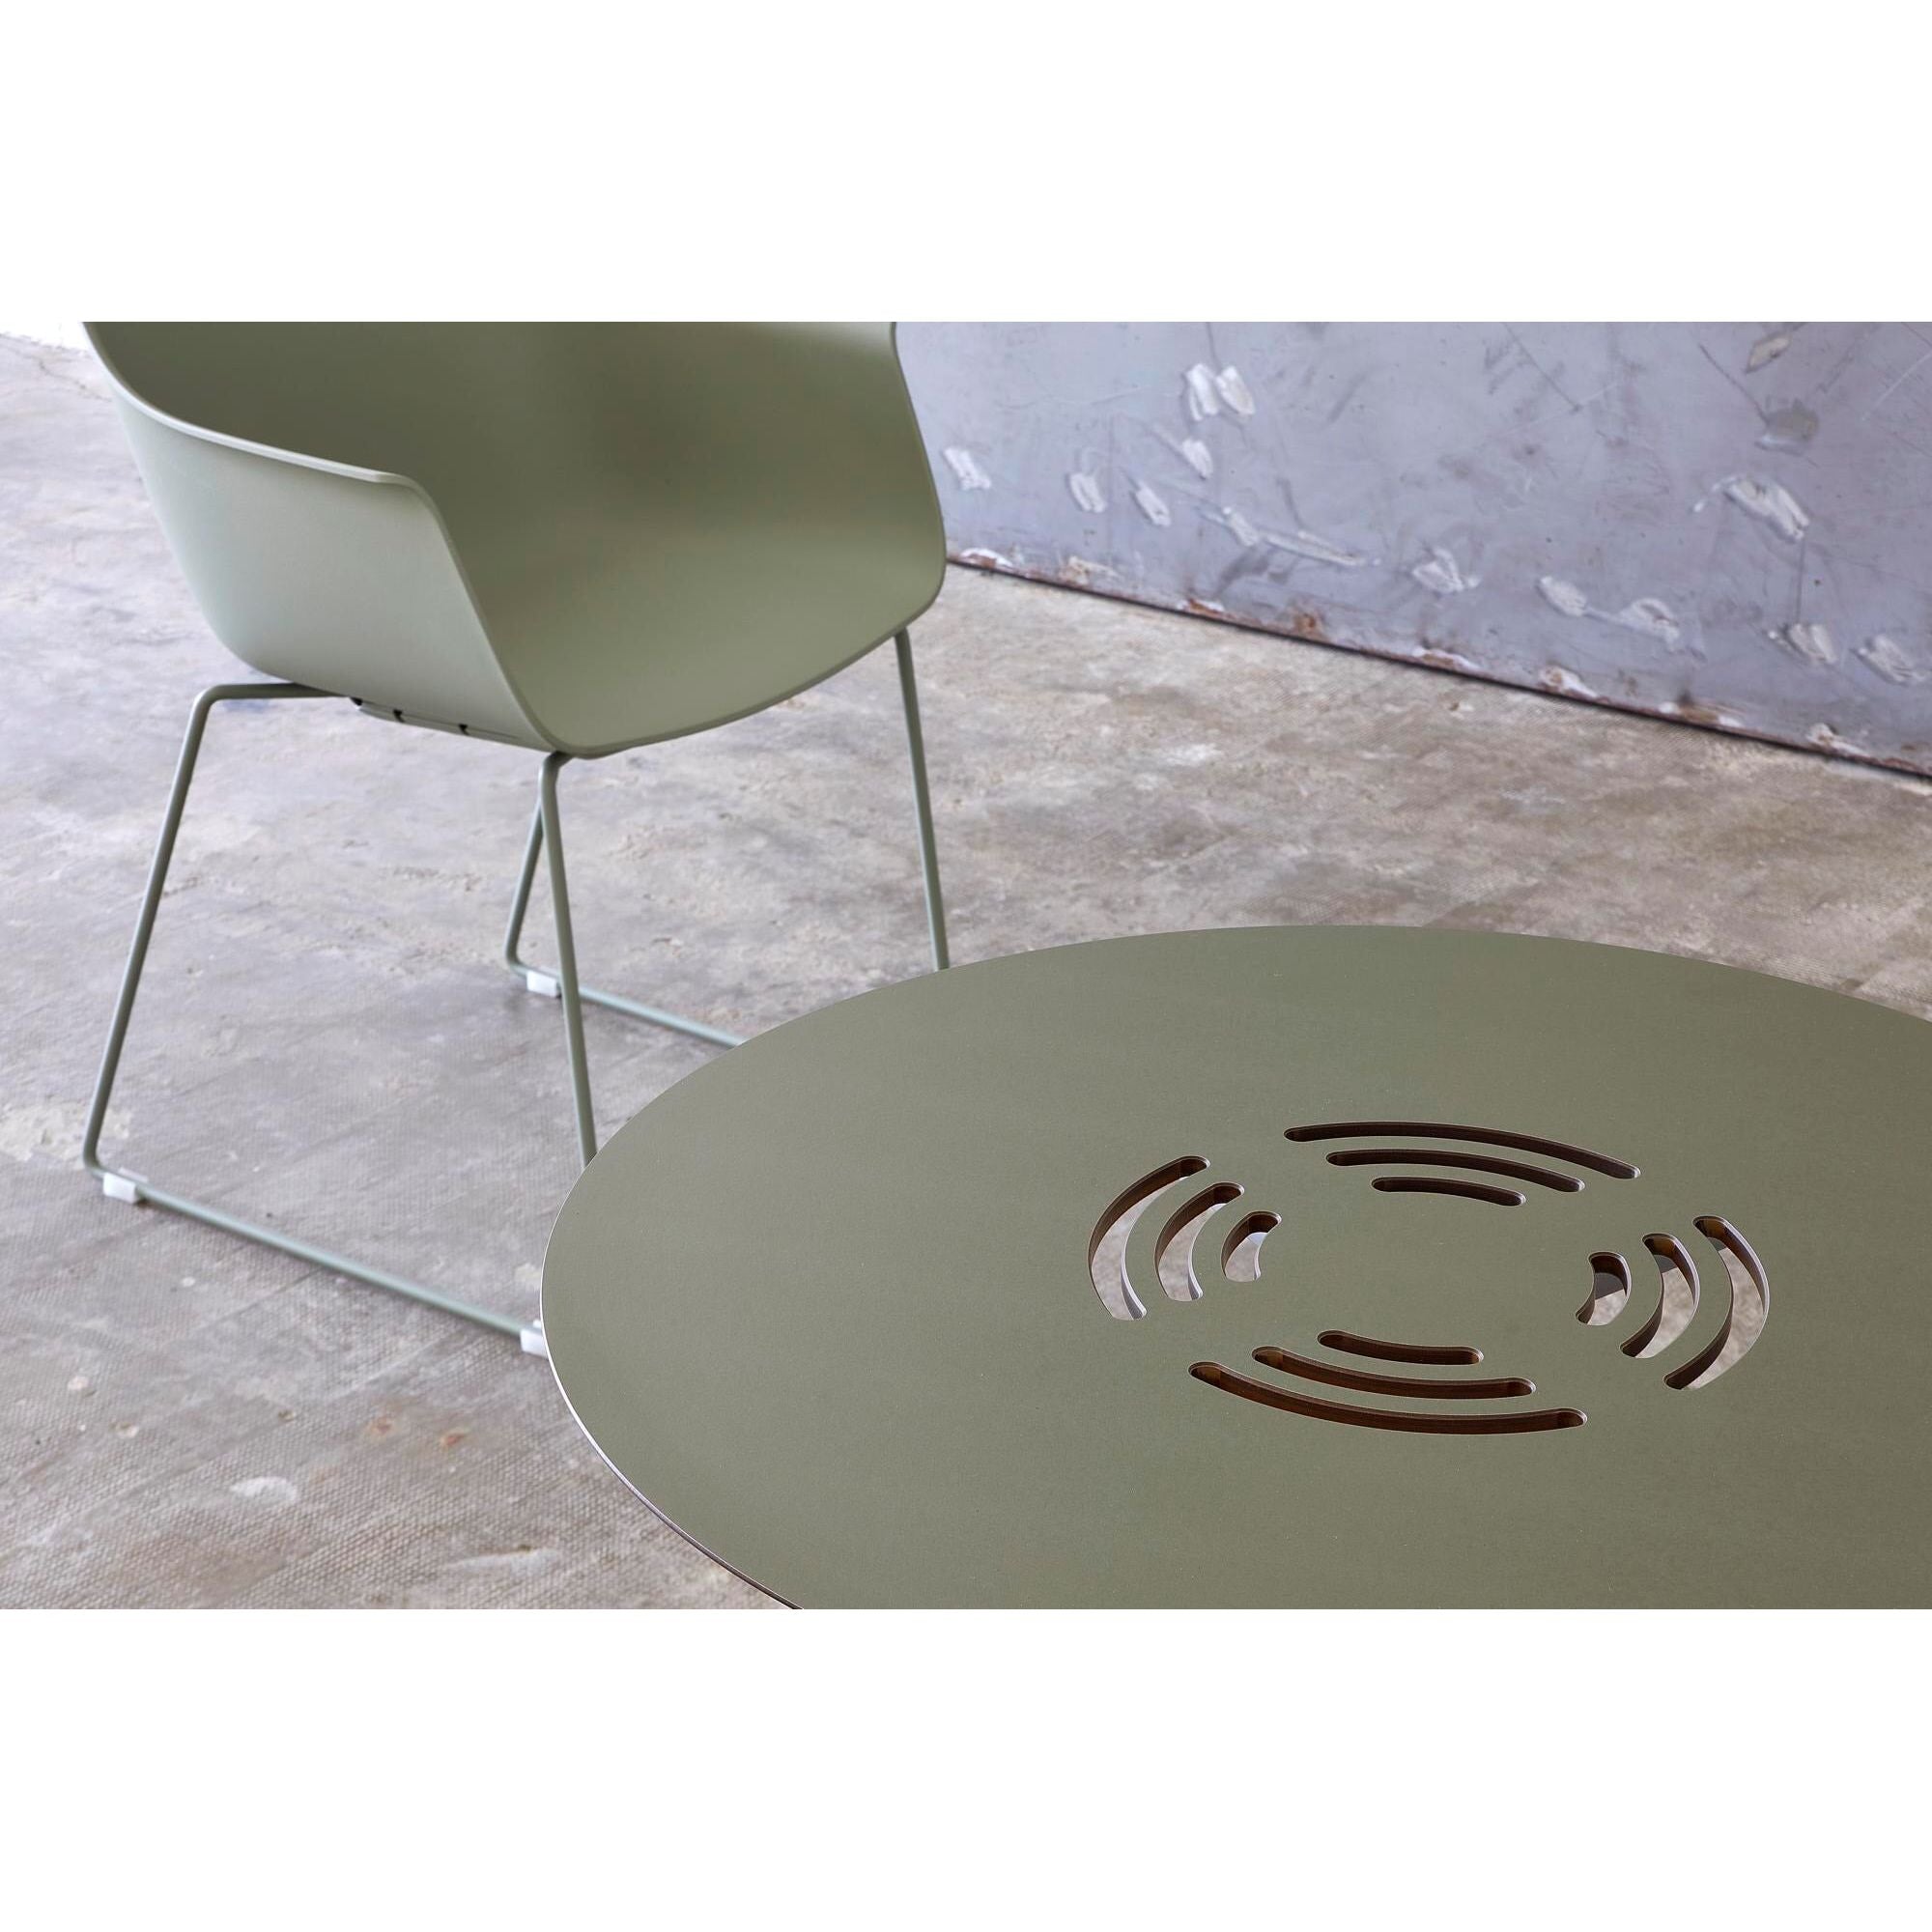 Resol toledo aire round table inside, outside Ø70 greenish